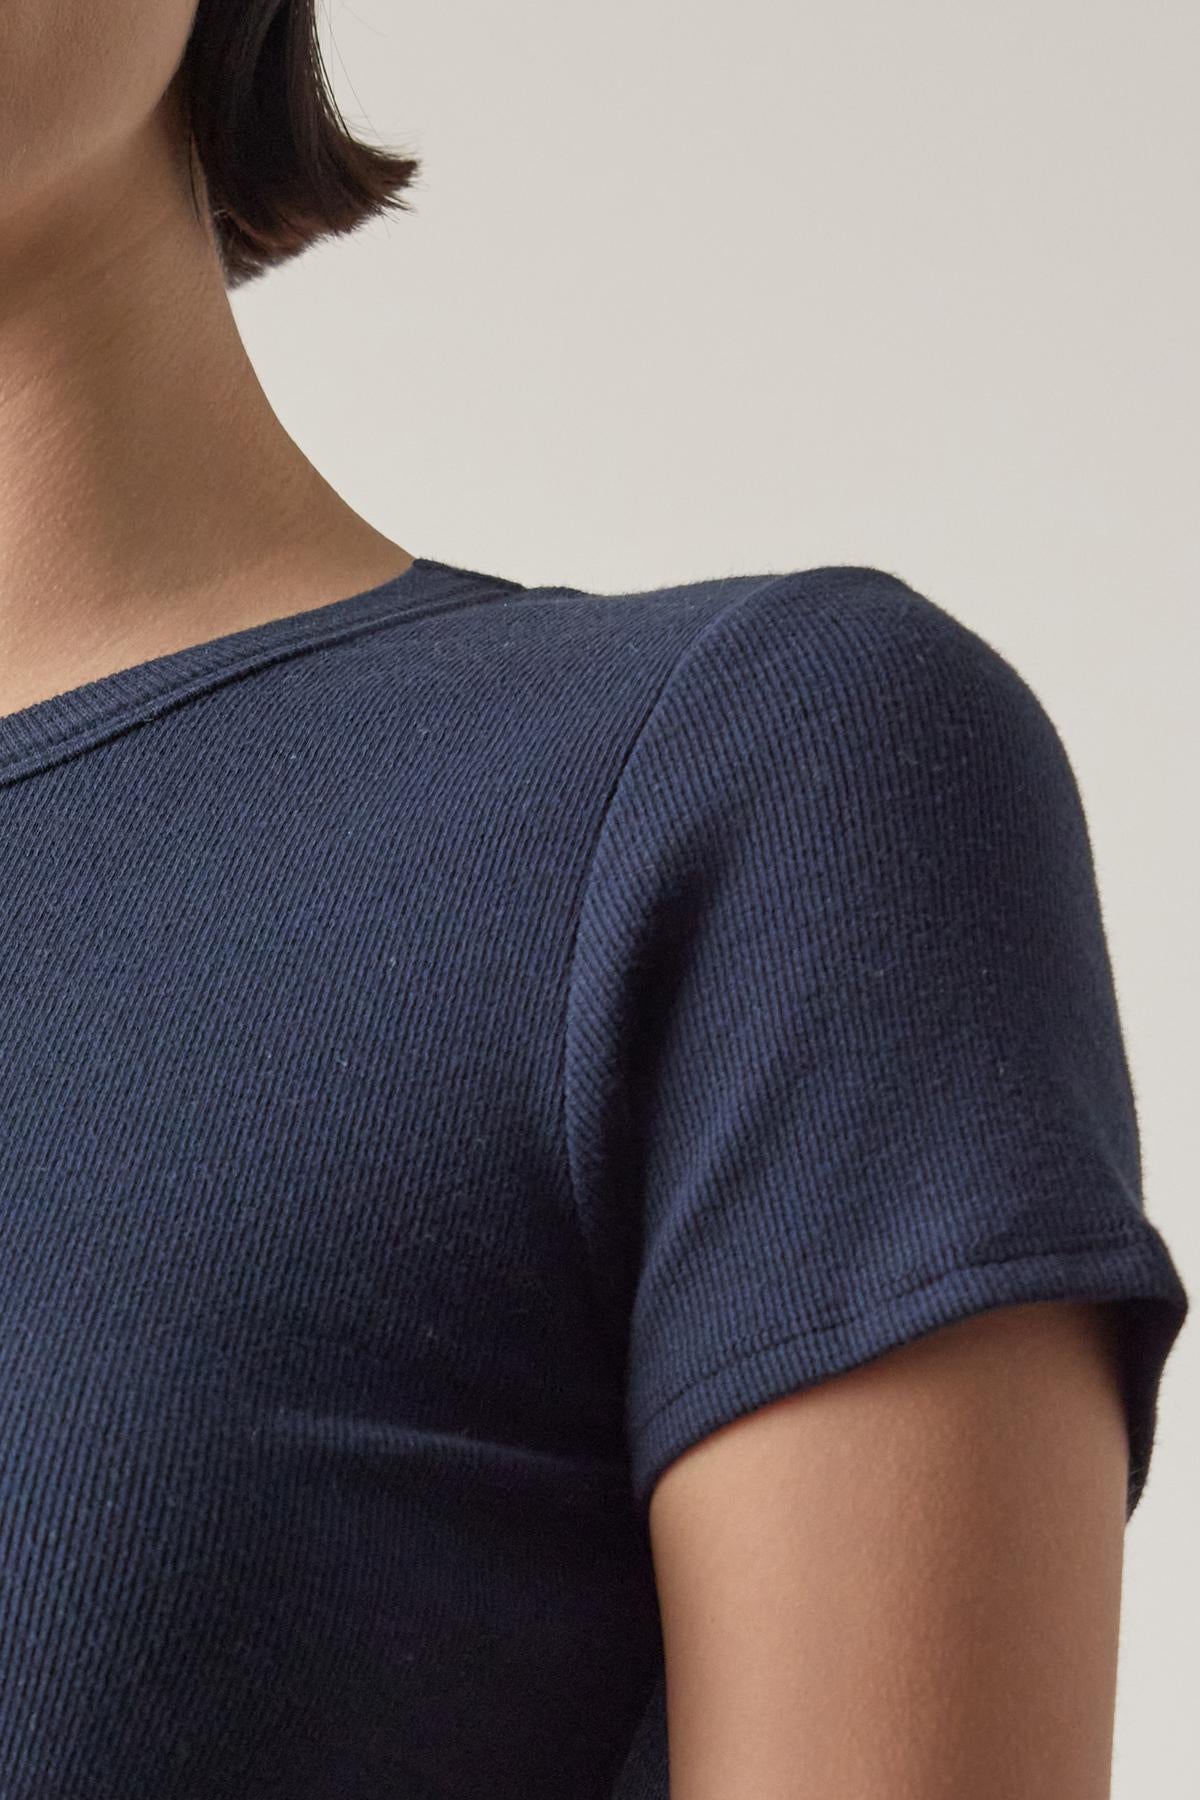 Close-up of a woman wearing a dark blue textured BEDFORD TEE by Velvet by Jenny Graham, with a crew neckline, focusing on the shoulder and neckline details.-36753616961729